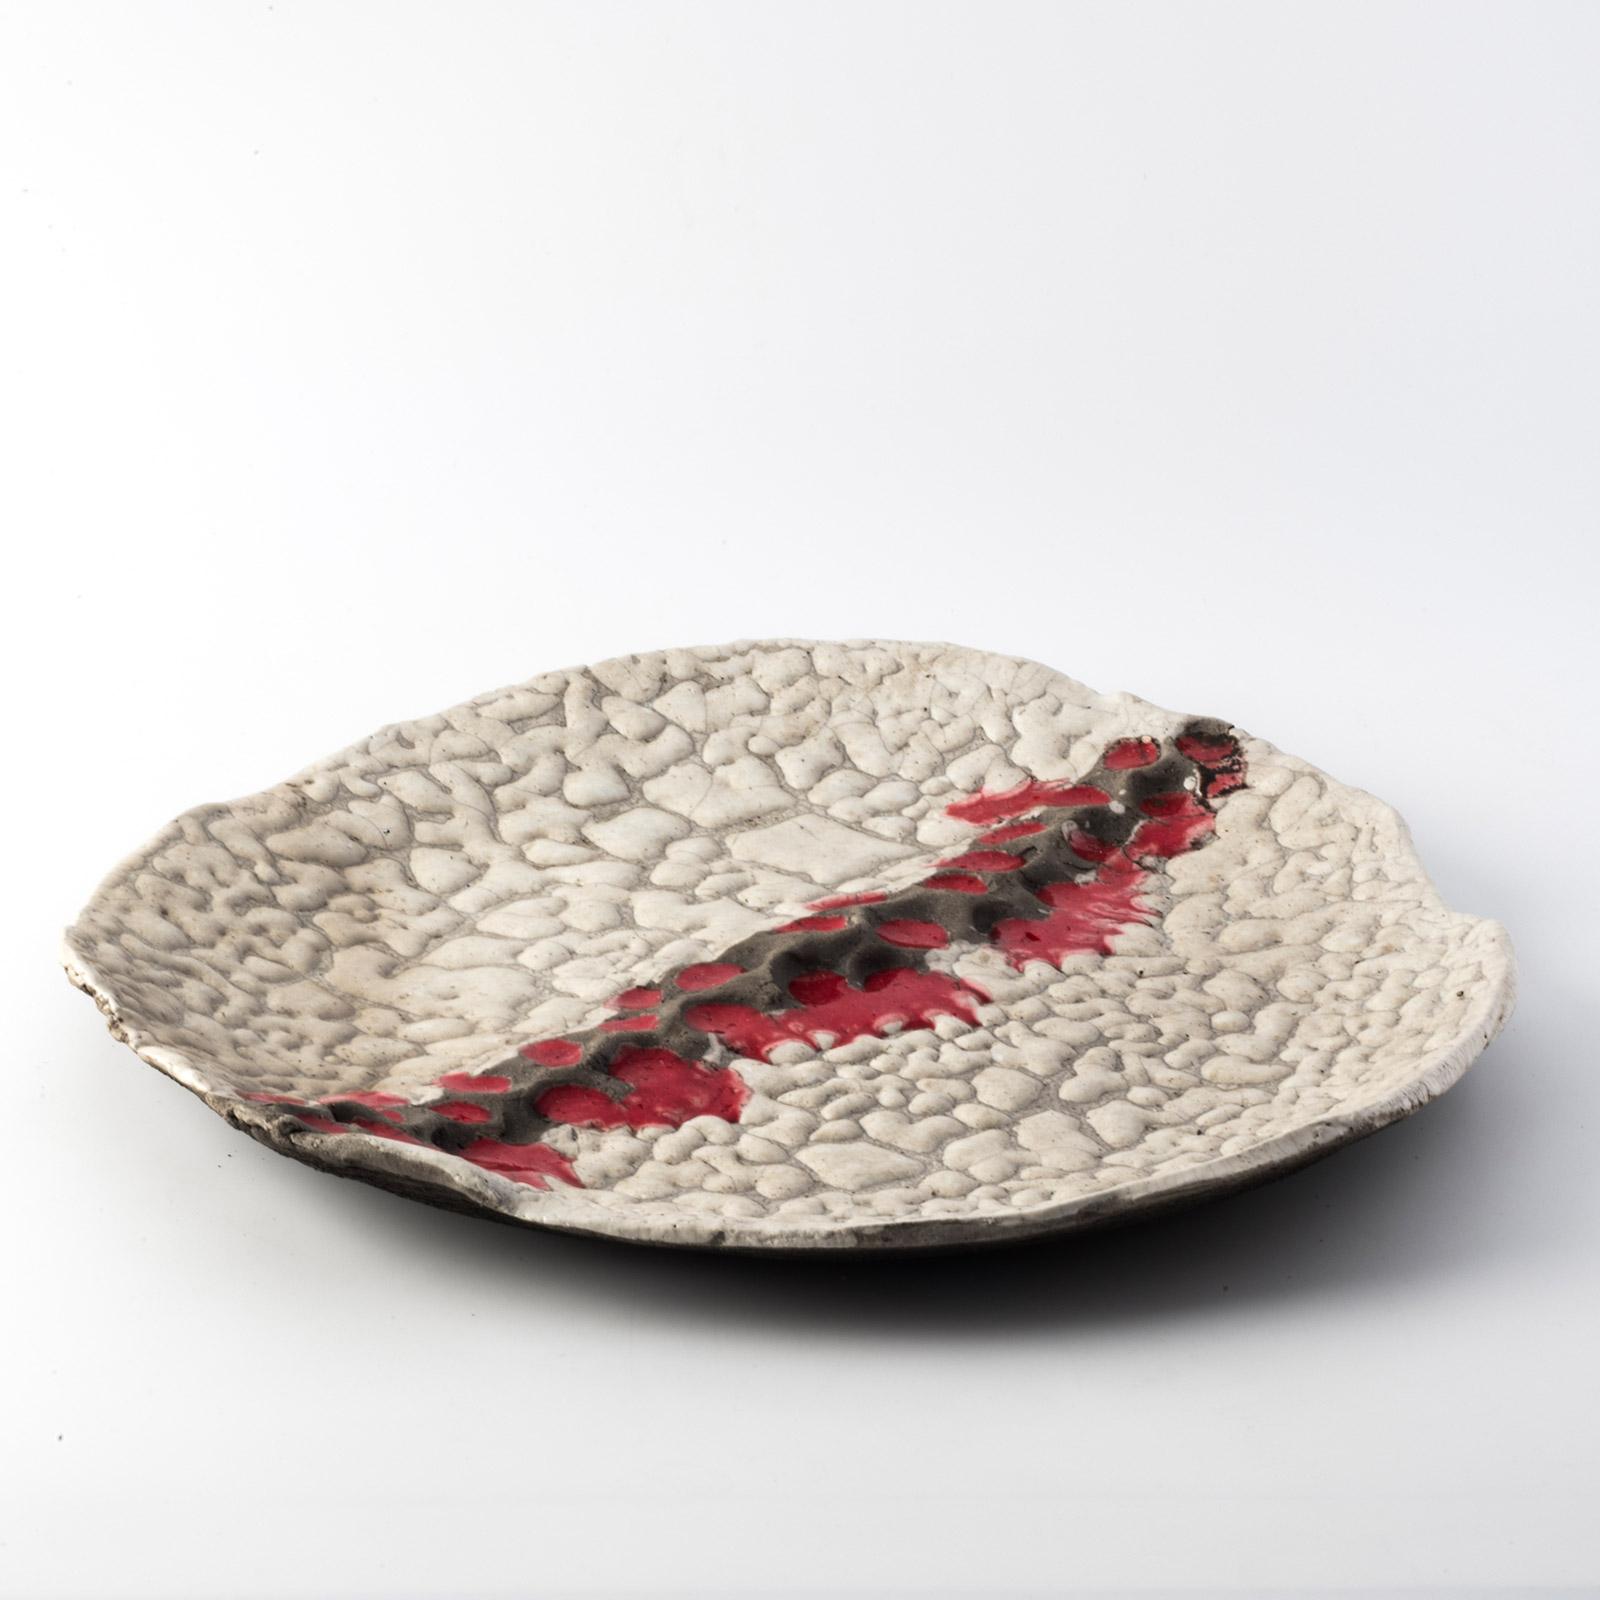 A very personal interpretation of making pottery transforms the texture of the LARGE MOON IN RED dish into a striking relief decoration with voids and solids  never the same that add the value of uniqueness. 
Designed and modeled entirely by hand by